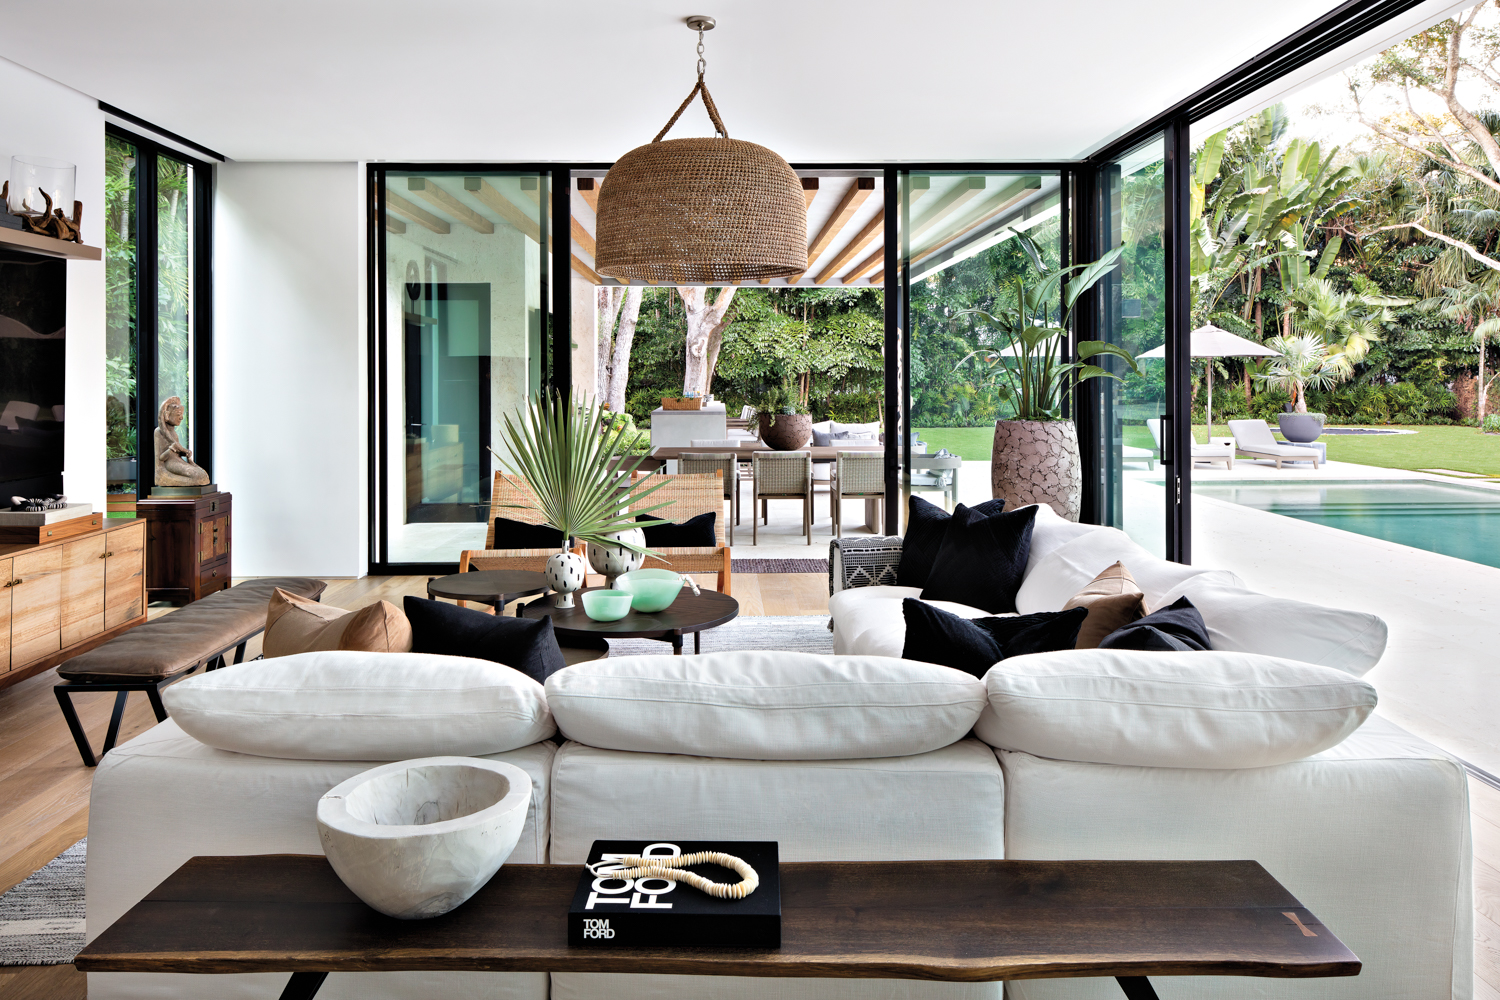 family room with oversize white sectional, rope overhead pendant and glass doors that open to lush backyard